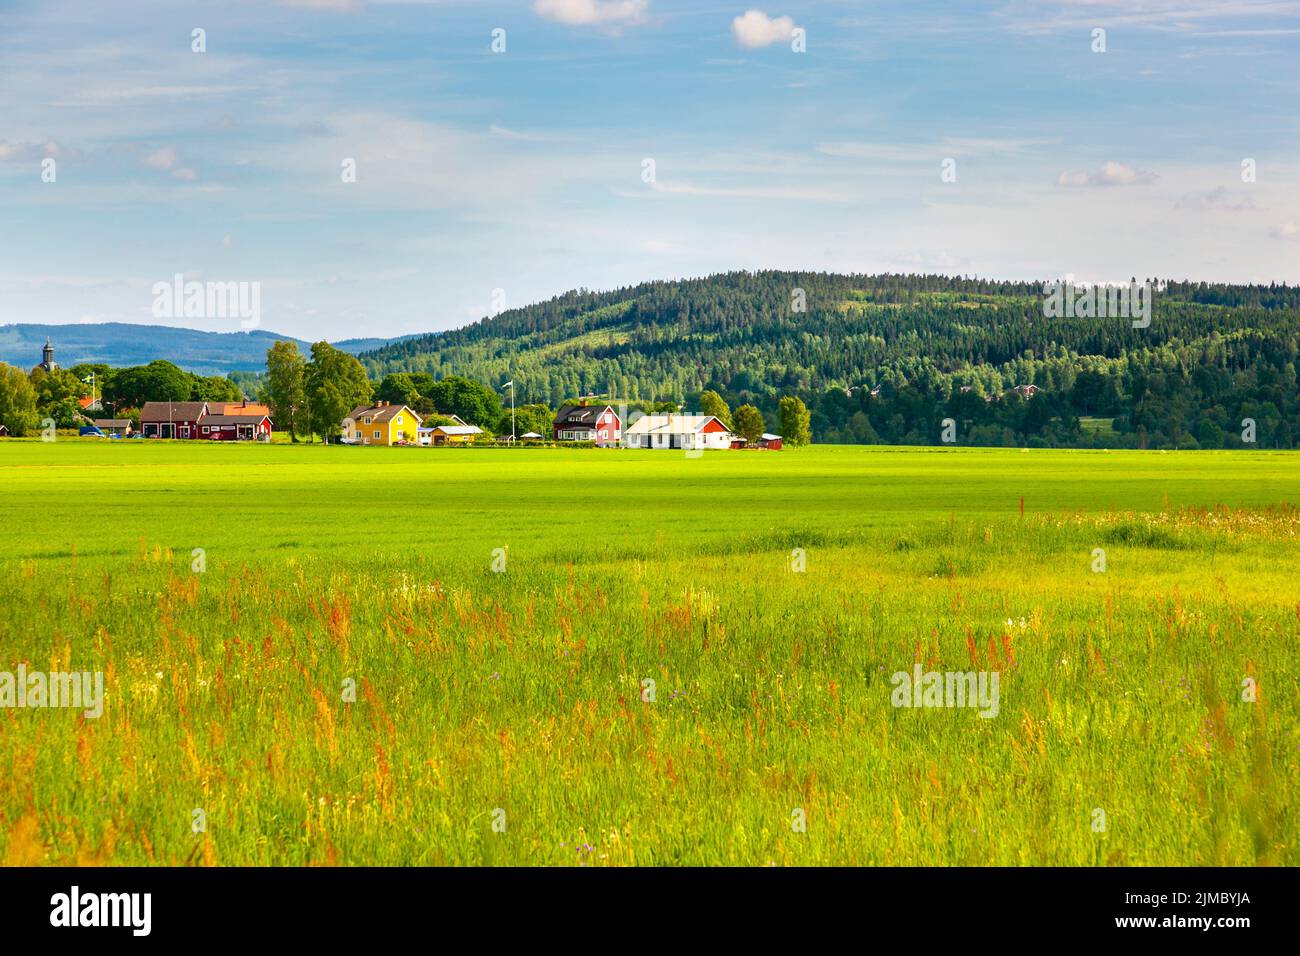 Swedish countryside with colourful houses and forest, Falun, Dalarna, Sweden Stock Photo